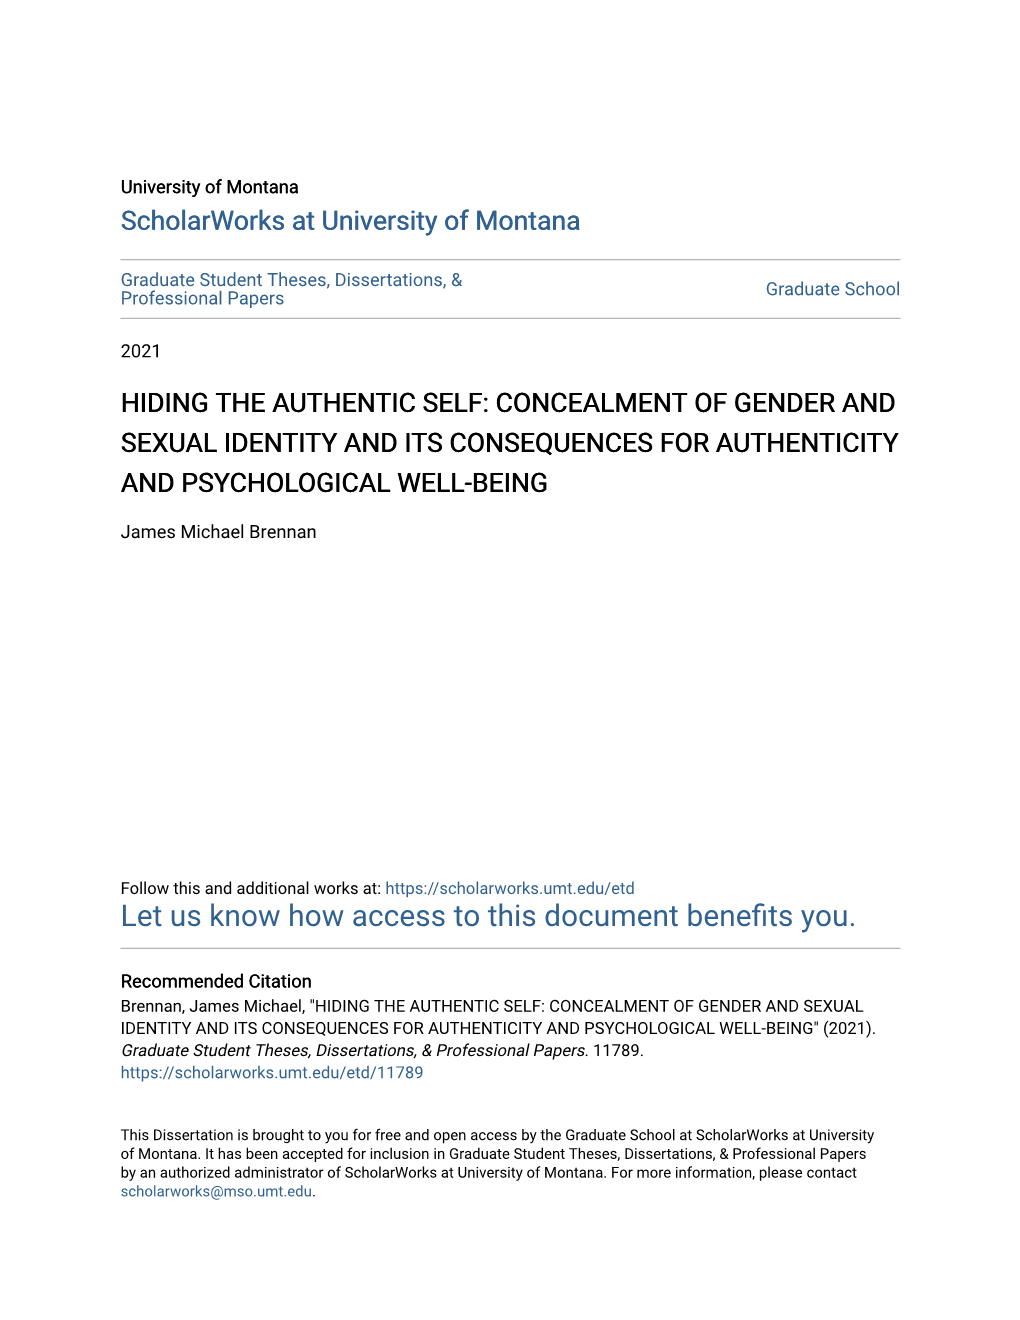 Hiding the Authentic Self: Concealment of Gender and Sexual Identity and Its Consequences for Authenticity and Psychological Well-Being